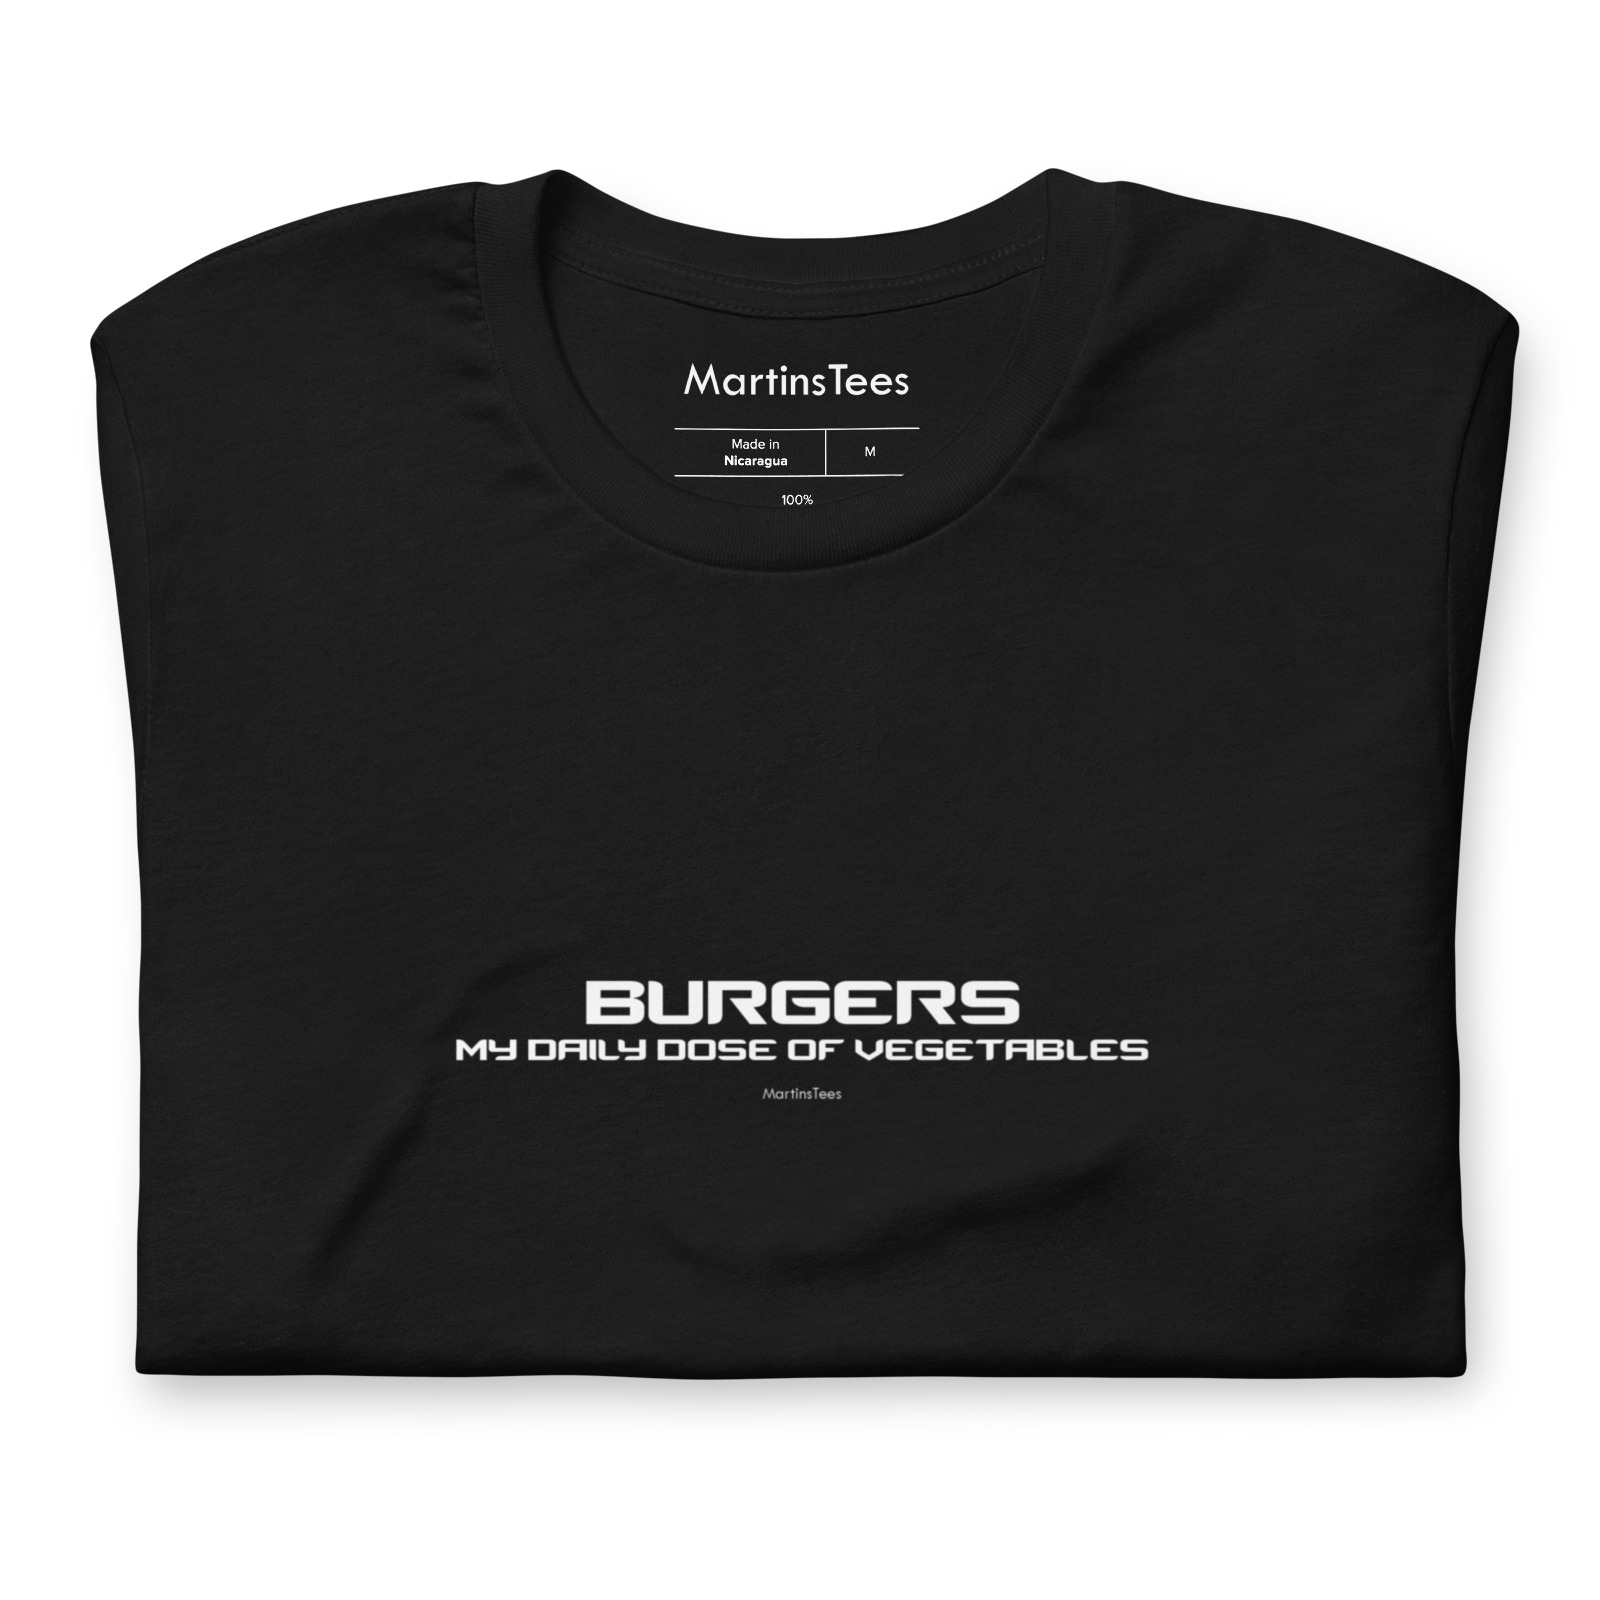 T-shirt: BURGERS - MY DAILY DOSE OF VEGETABLES